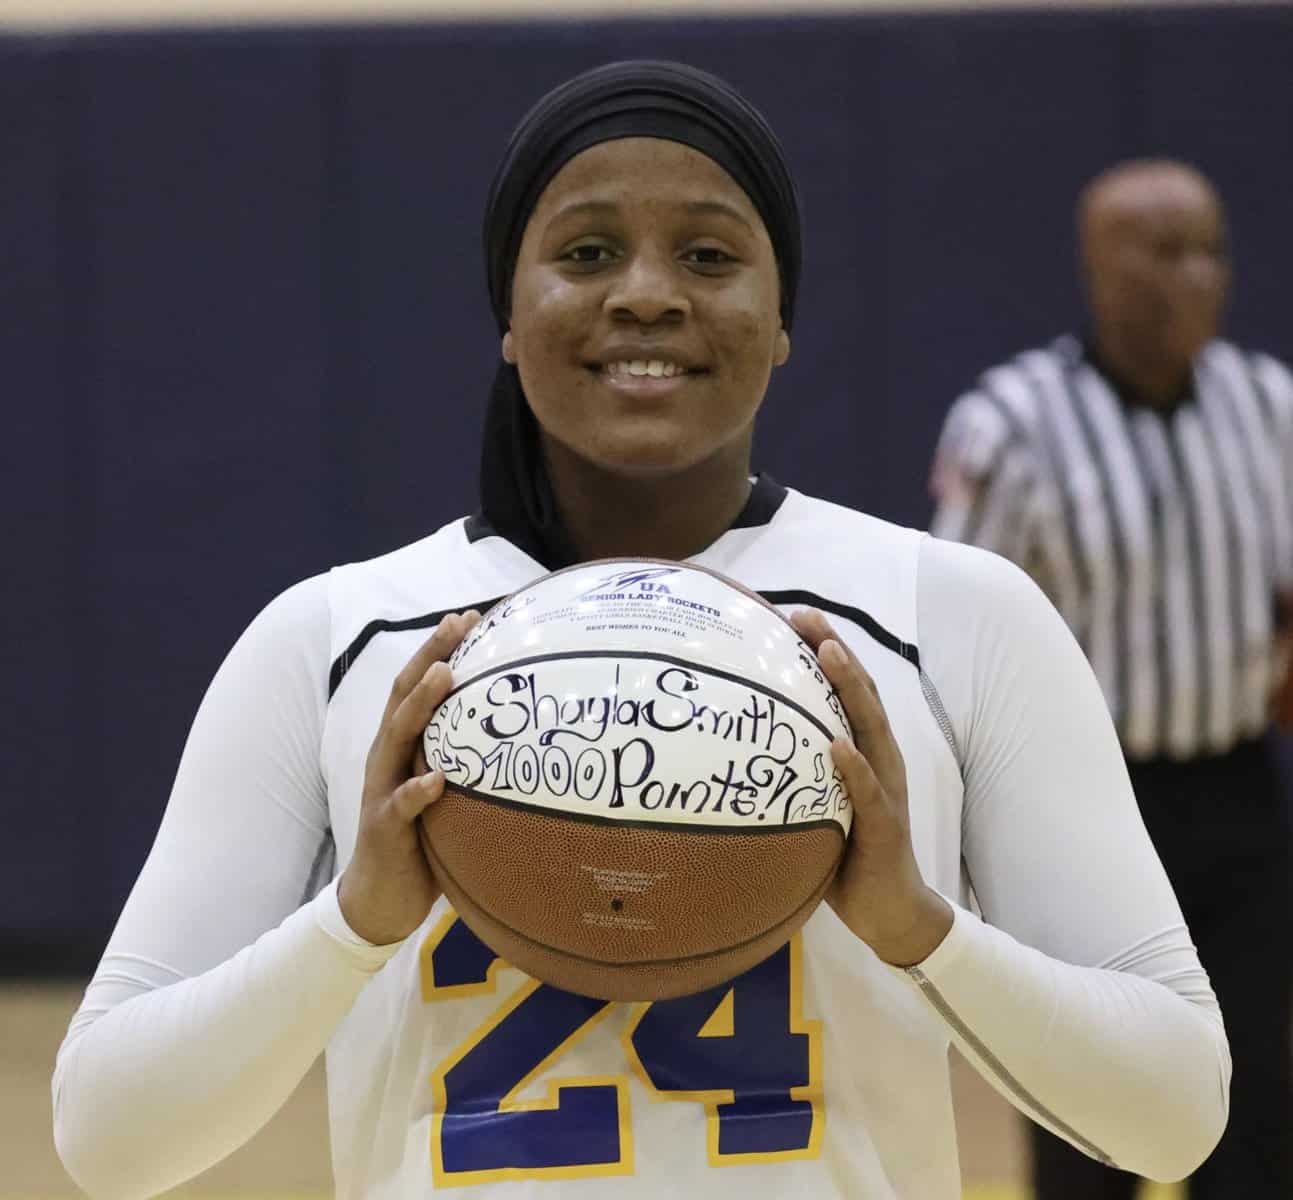 Audenried’s Smith hits 1000 points